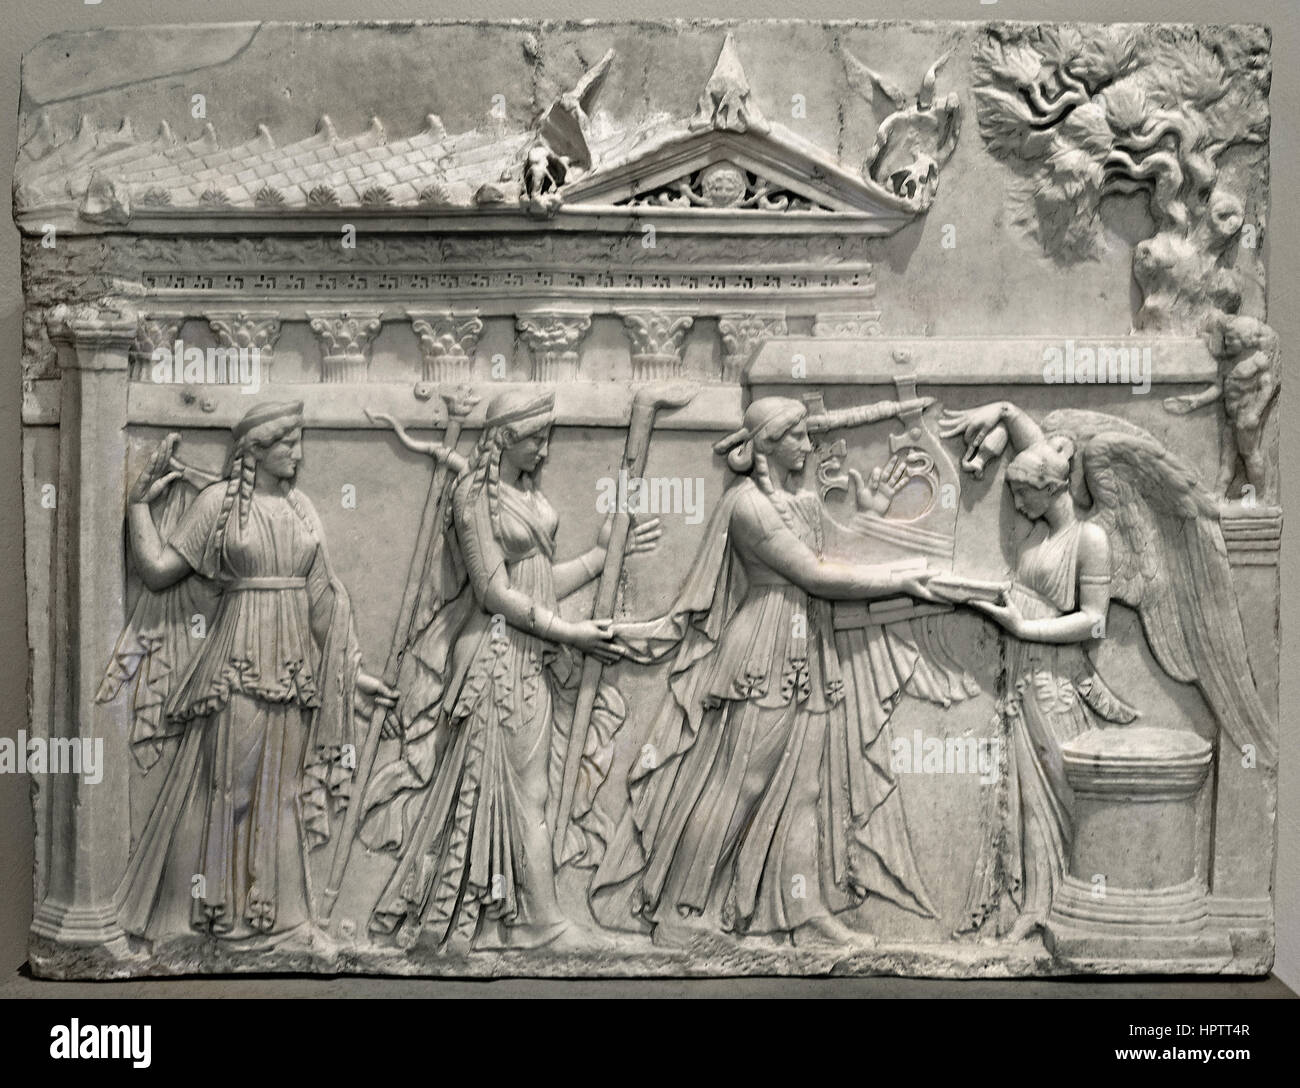 elief with Procession of Gods (Apollo, Diana and Latona) and Sanctuary; 30-20 BC ( Procession of Gods and Sanctuary Depicted is a procession of the gods Apollo, Diana and Latona approaching a round altar in front of which stands Victoria. The offering takes place in a temple sanctuary. ) Stock Photo